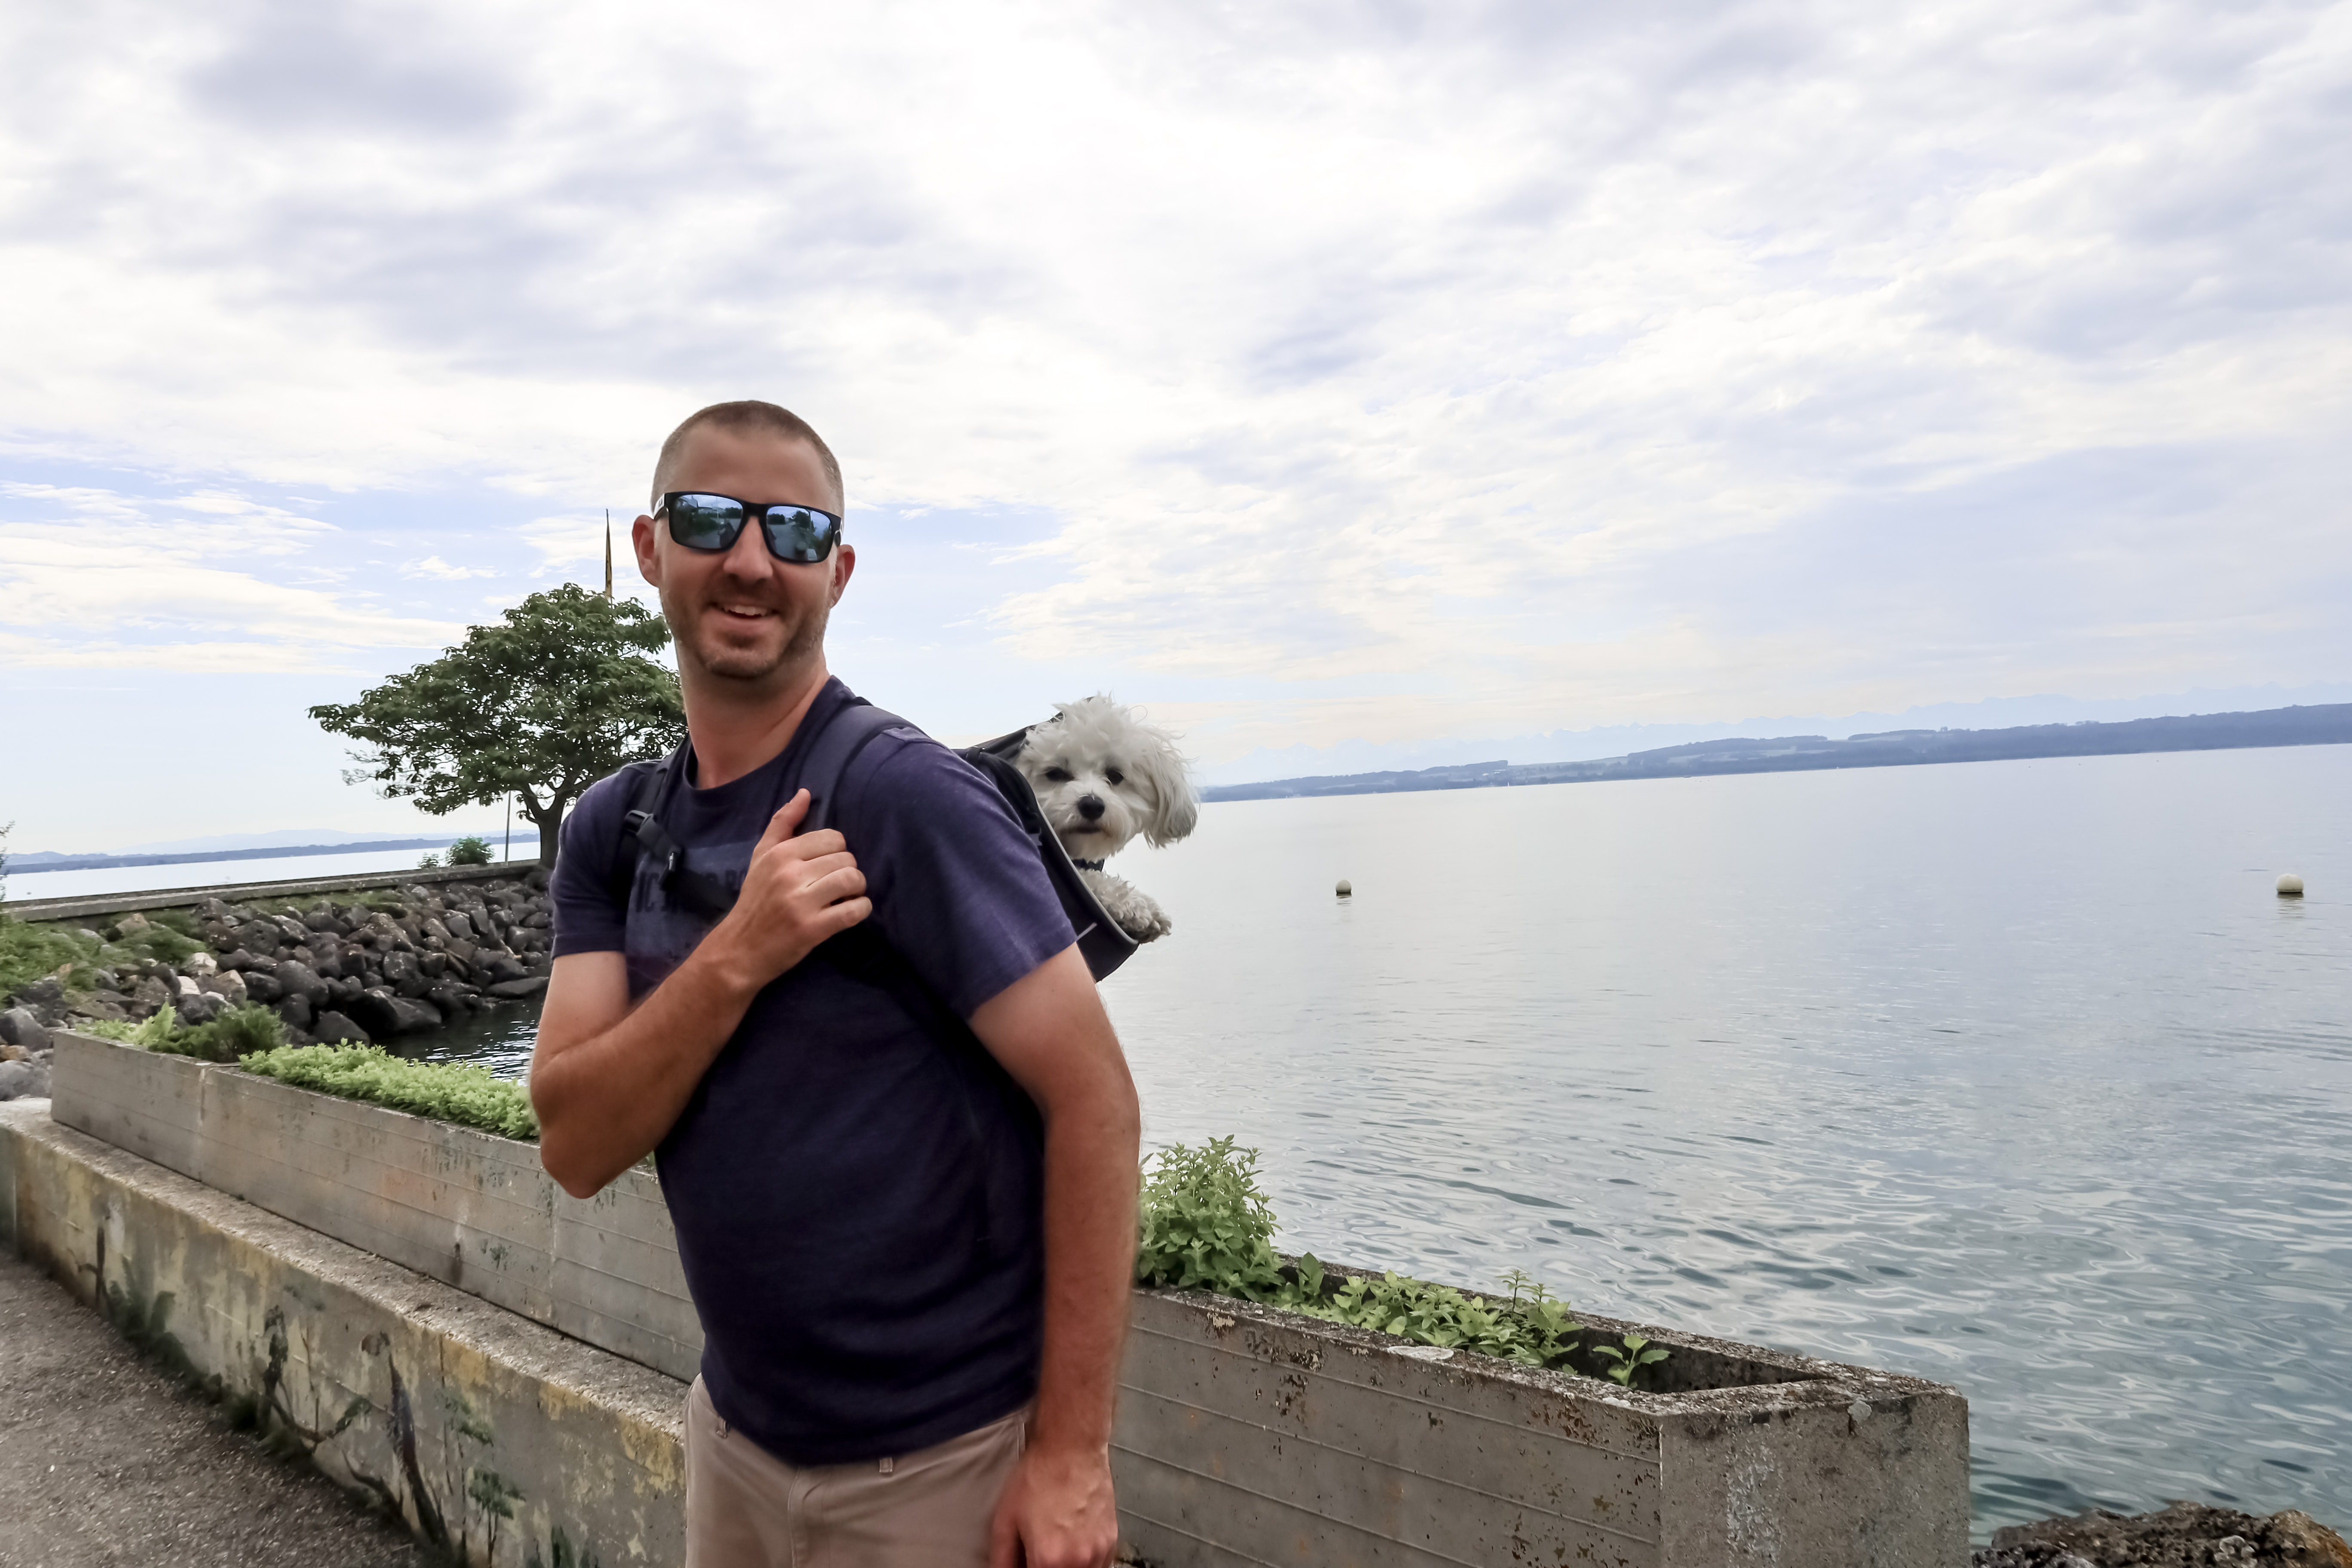 Yeti on the Bike Ride - What is there to do in Neuchâtel with children?